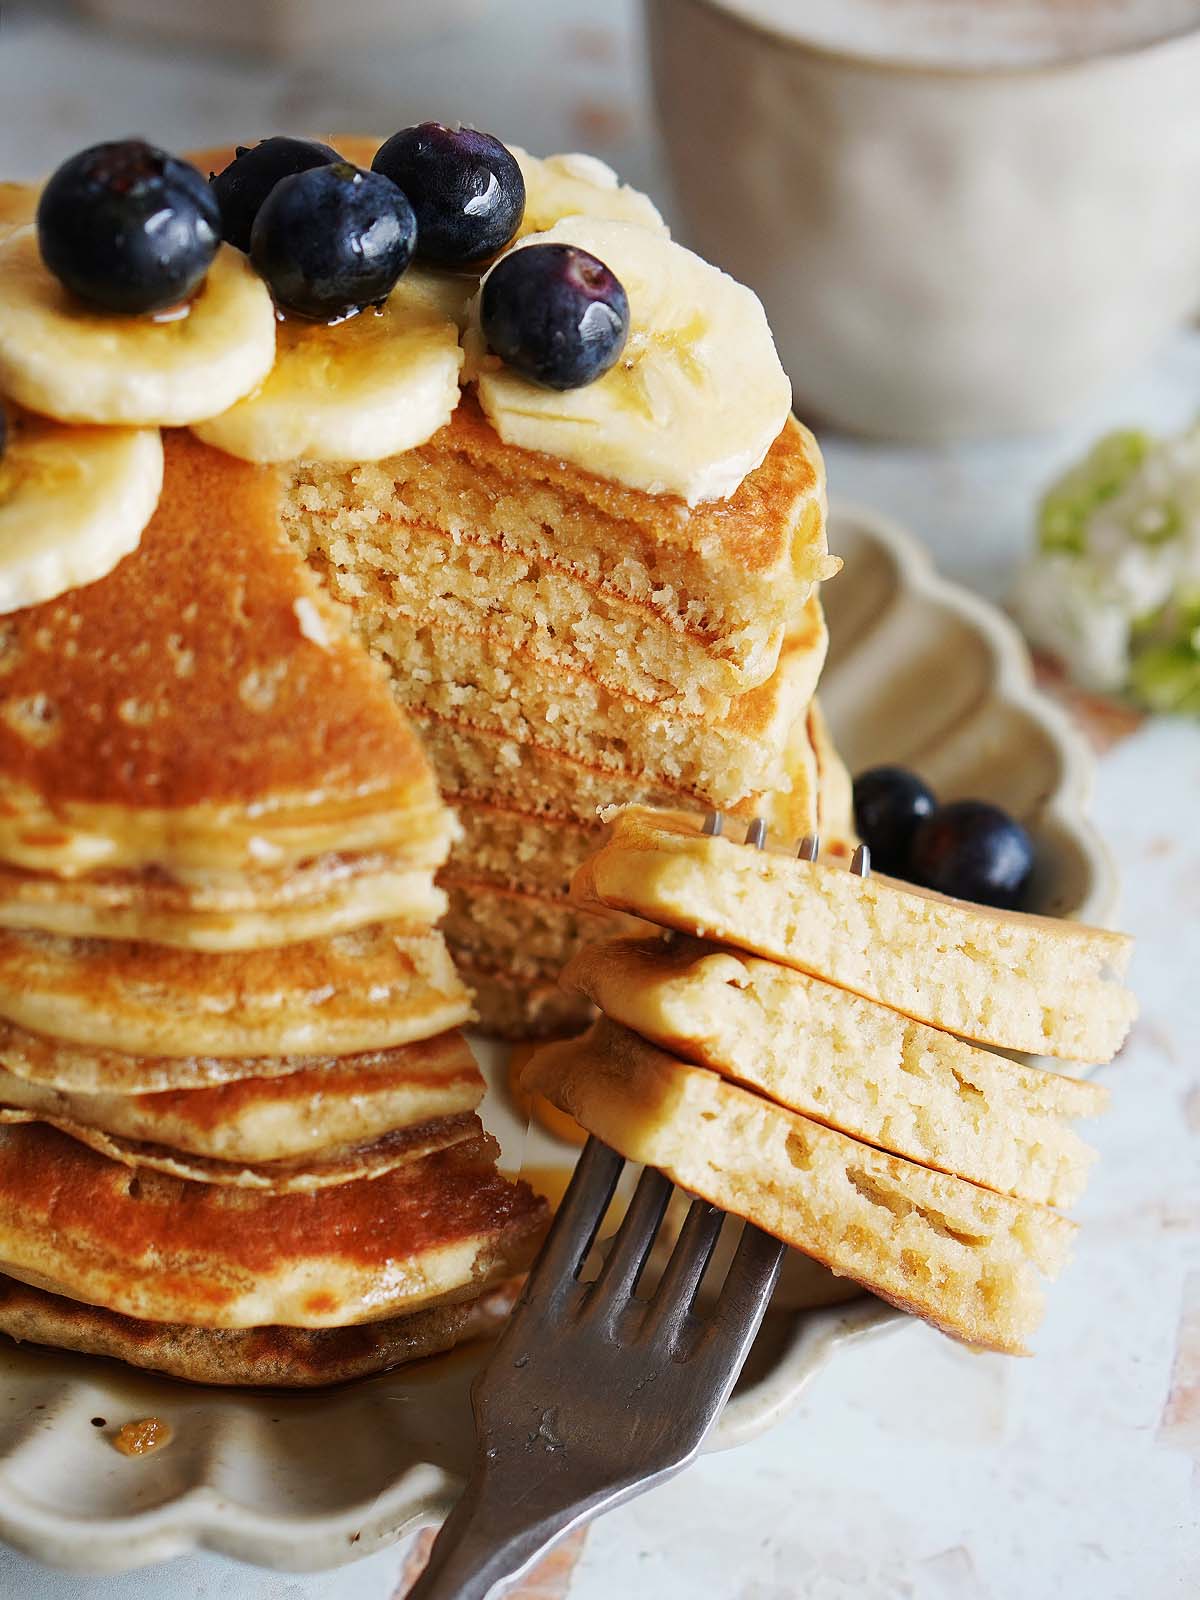 A stack of hotcakes topped with sliced bananas and blueberries.